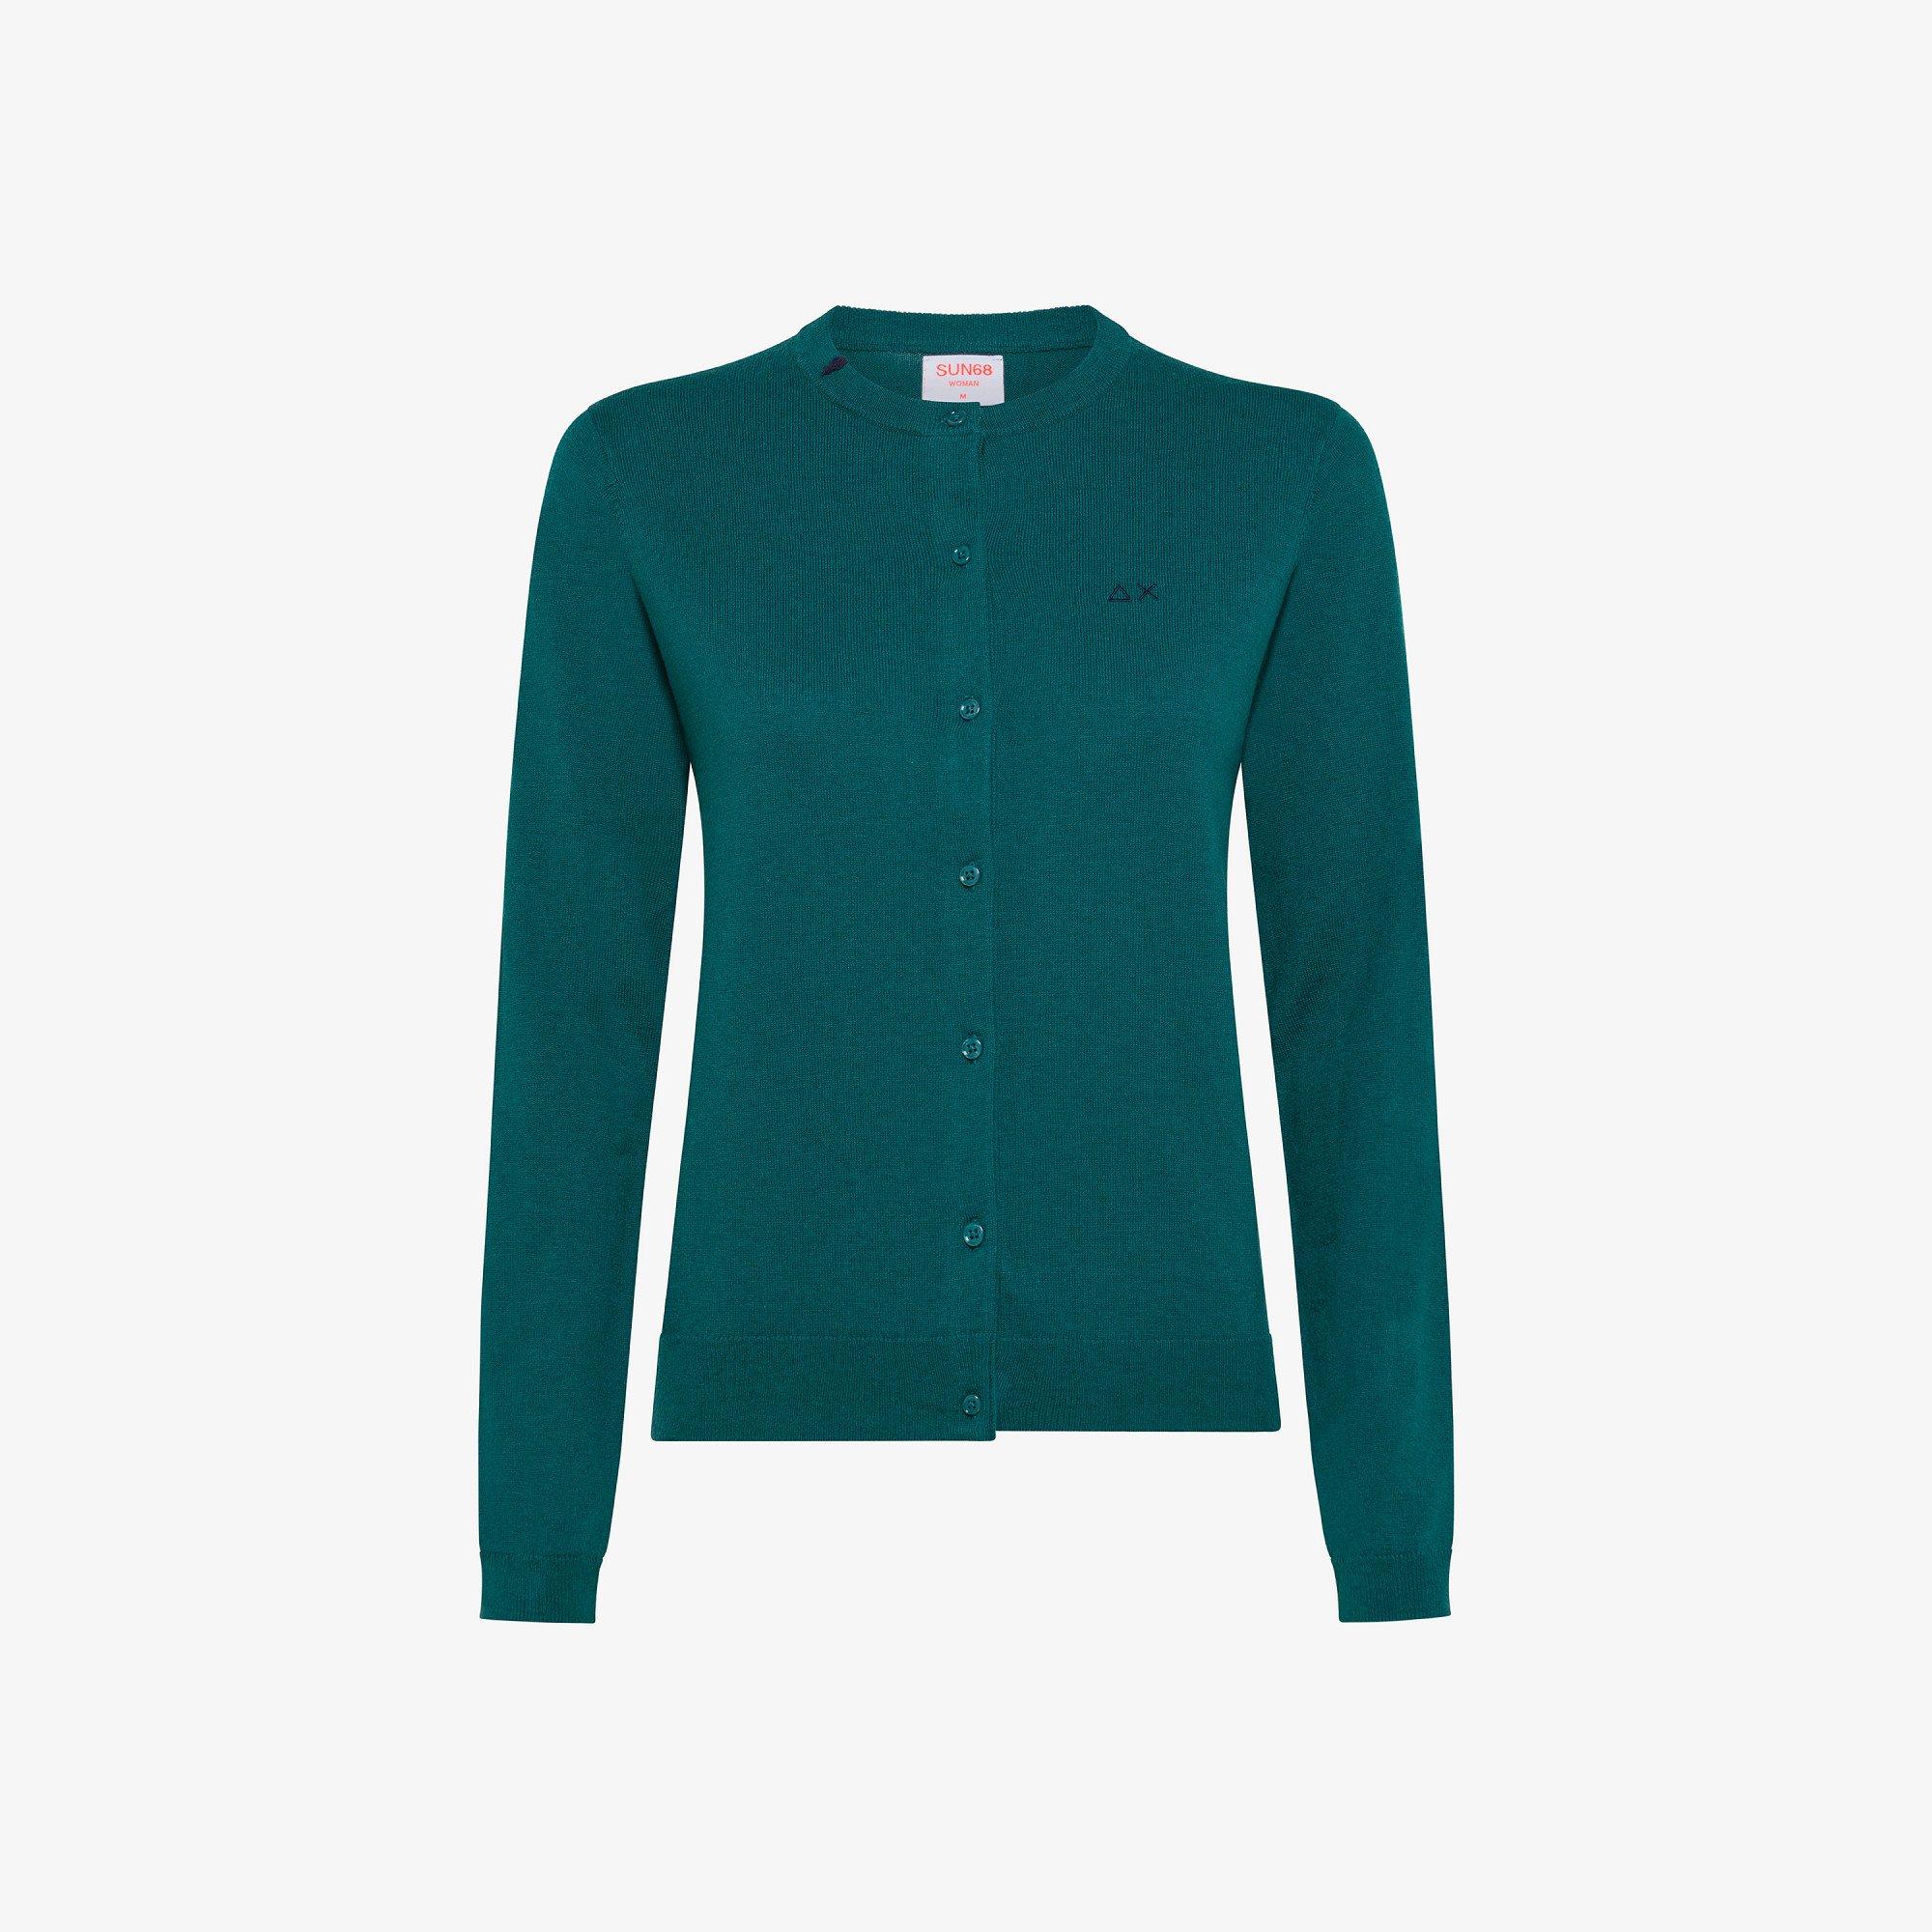 CARDIGAN SOLID L/S VERDE INGLESE